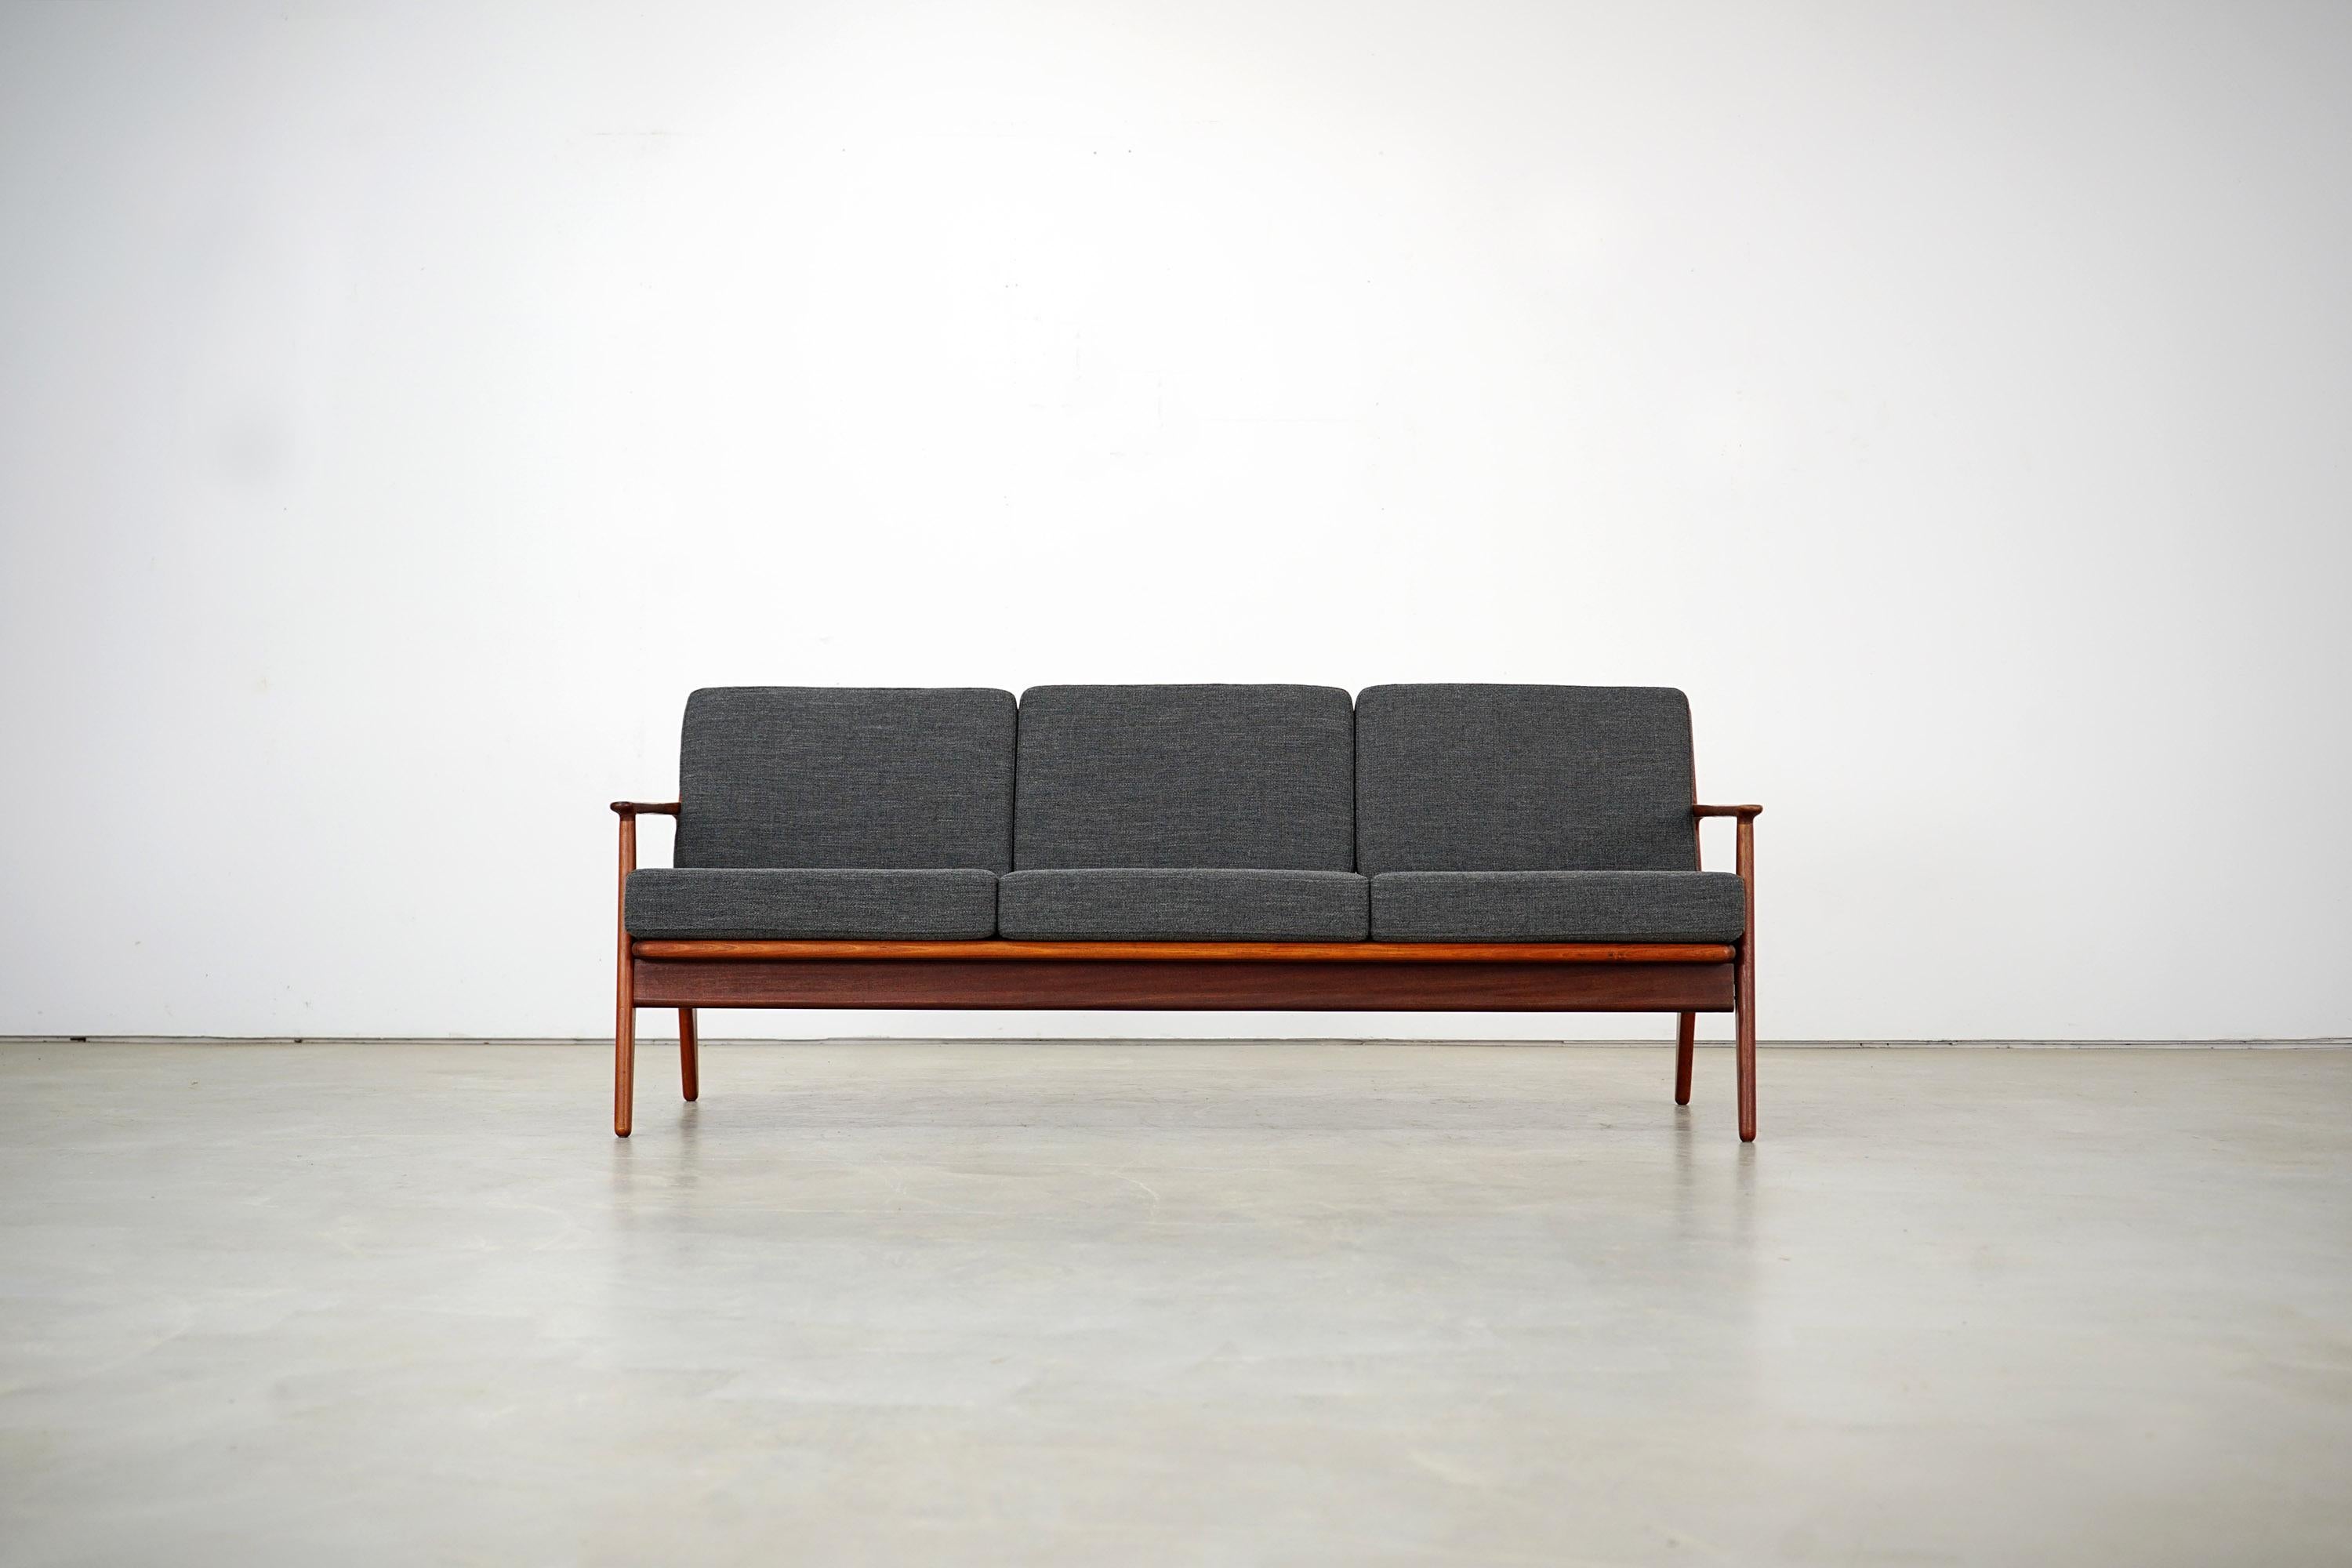 The sofa designed by Arne Vodder for Vamo Sønderborg can accommodate up to three people. It was manufactured in Denmark in the 1960s. Teak was used for the high quality workmanship. The exceptional soft-edged design is complemented by high-quality